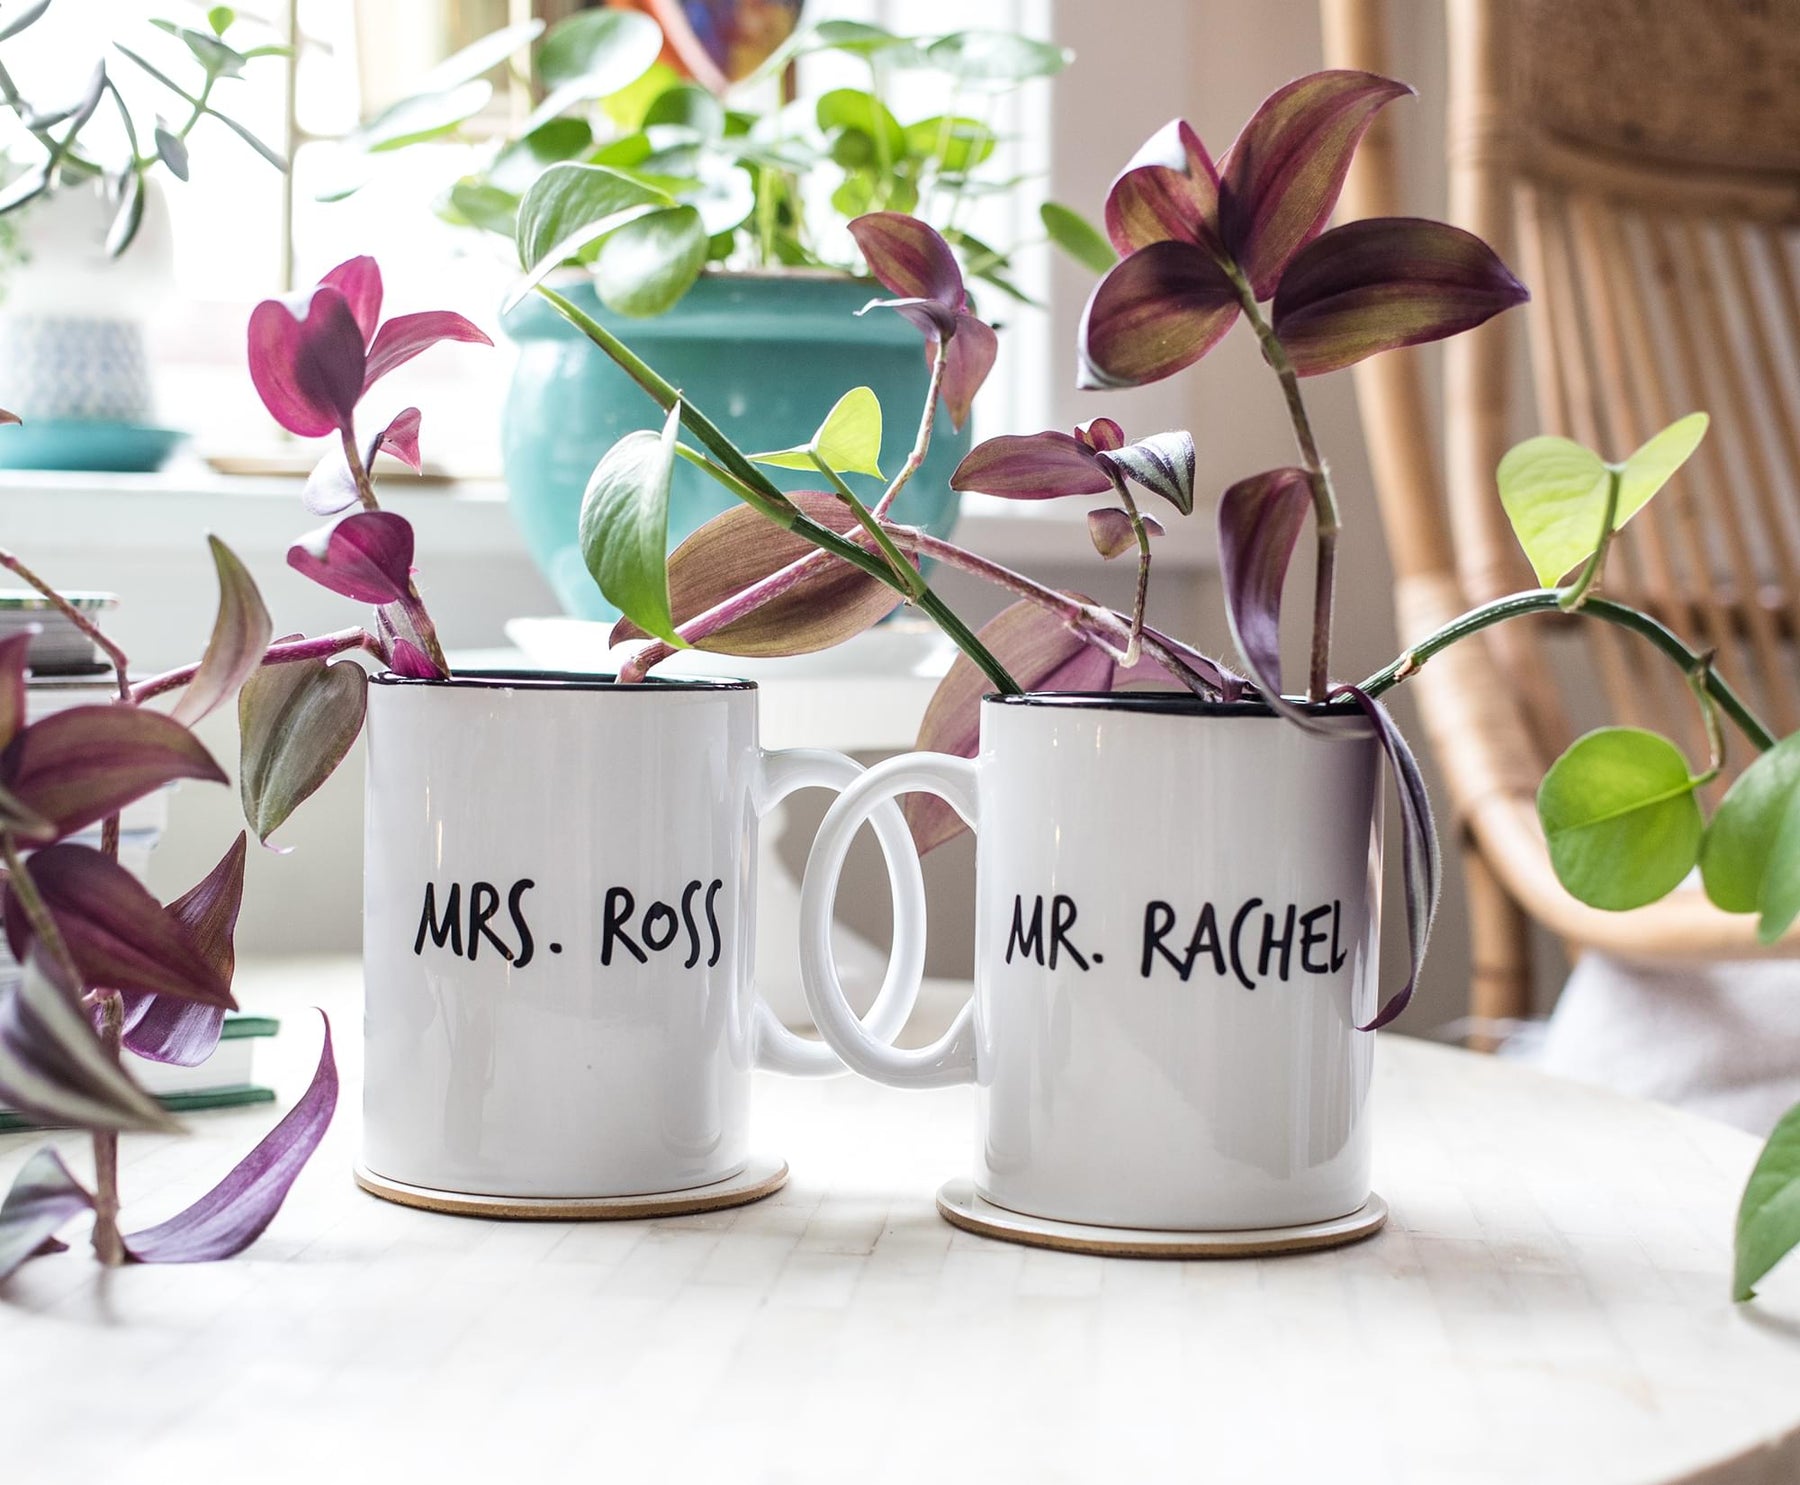 Friends Mr. Rachel Whiskers and Mrs. Ross Moustache Double-Sided Mugs | Set of 2